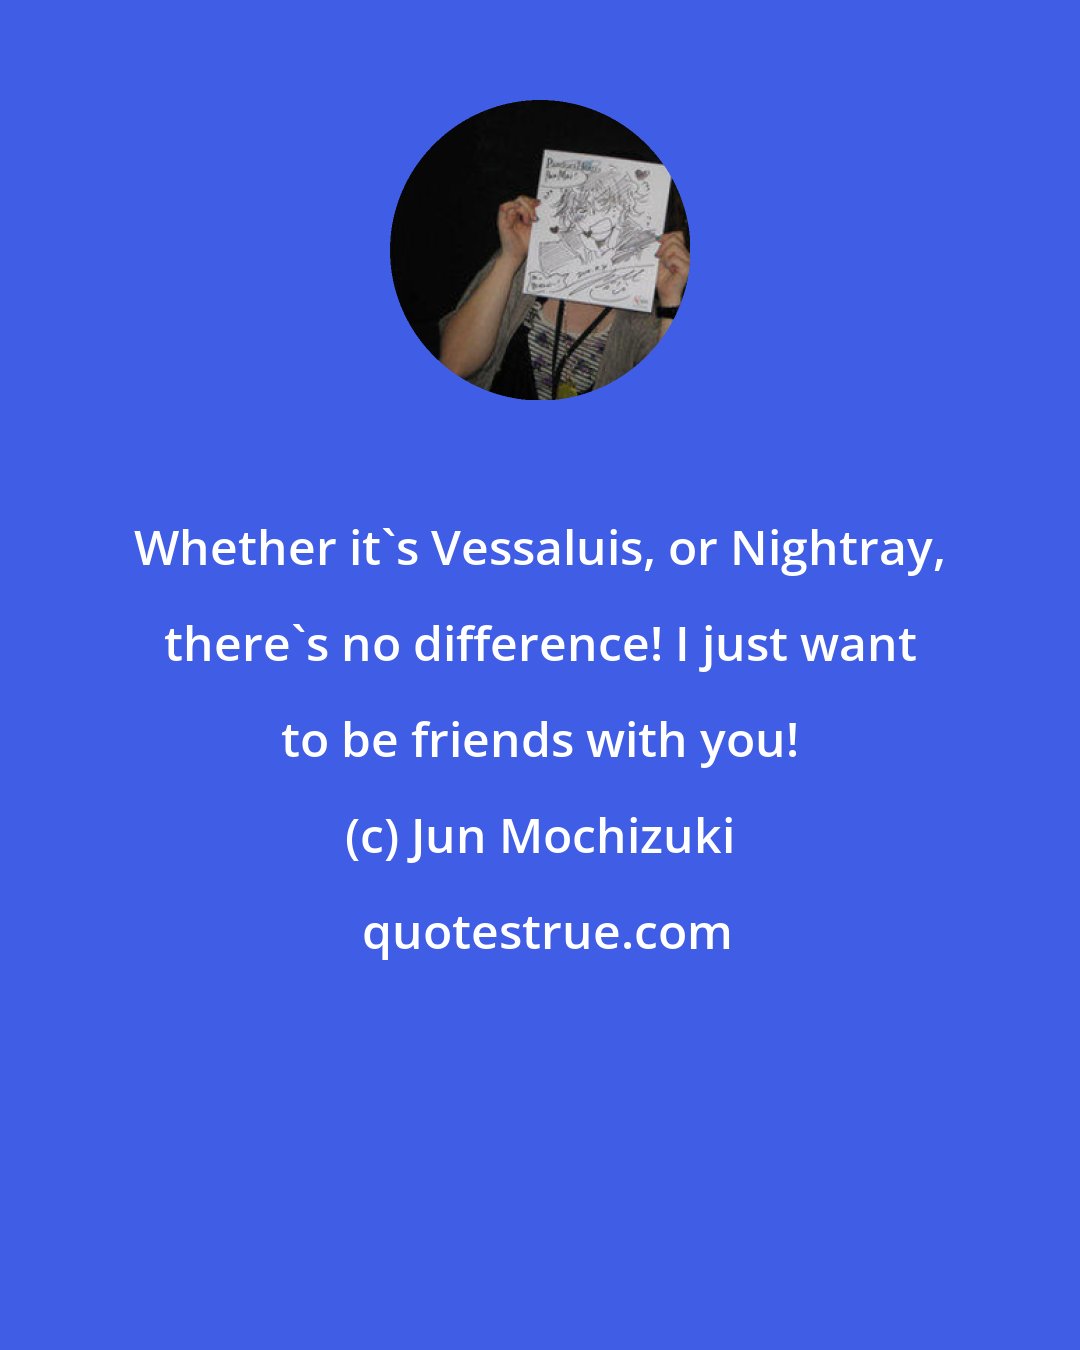 Jun Mochizuki: Whether it's Vessaluis, or Nightray, there's no difference! I just want to be friends with you!